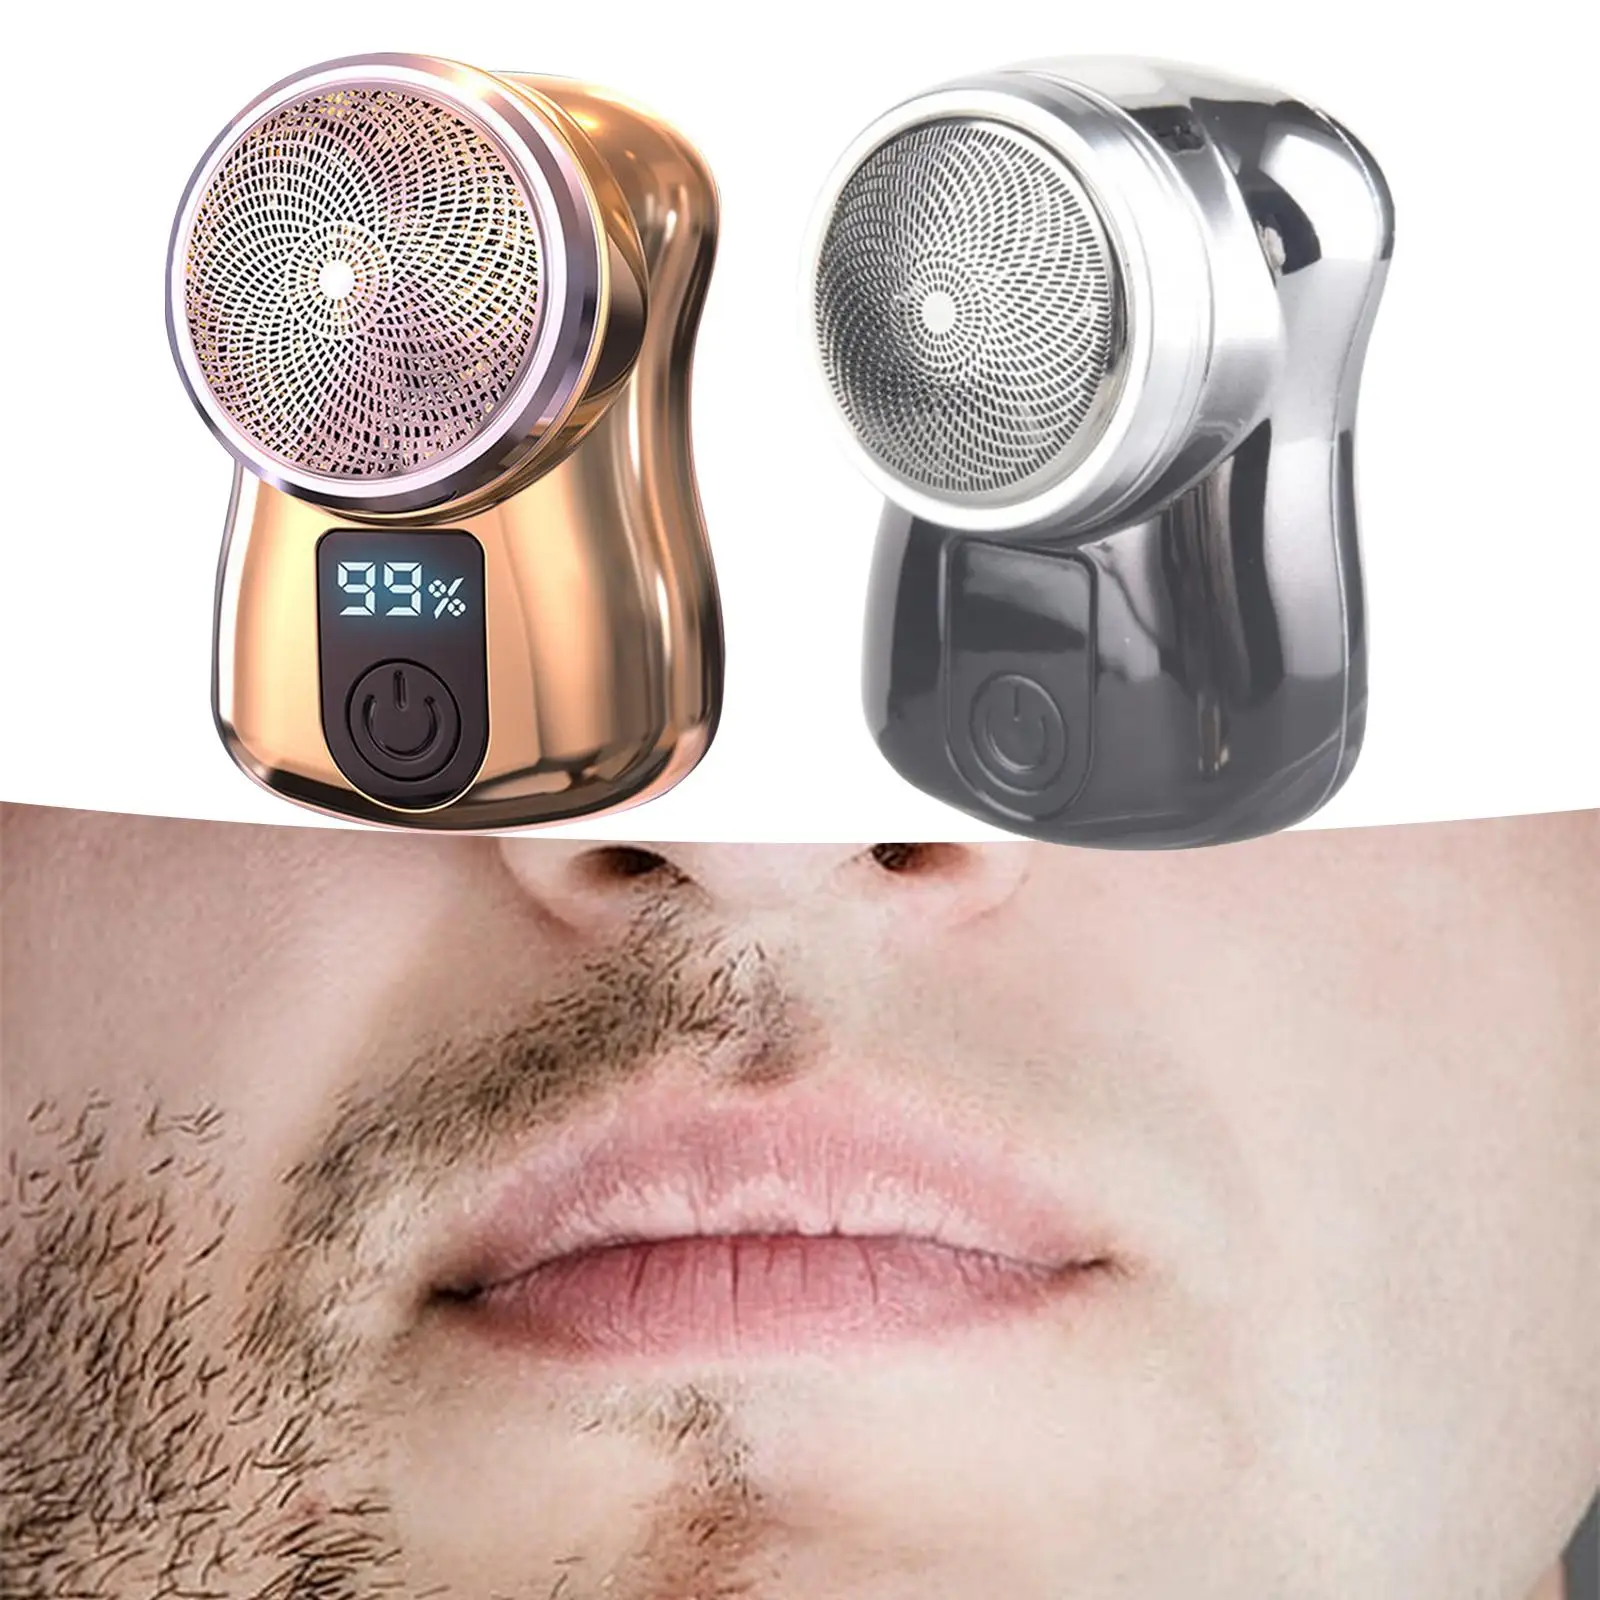 Mini Shaver Father`s Day Gifts Cordless Rechargeable Shaving Removable and Washable Head Digital Display Beard Razor Trimmer